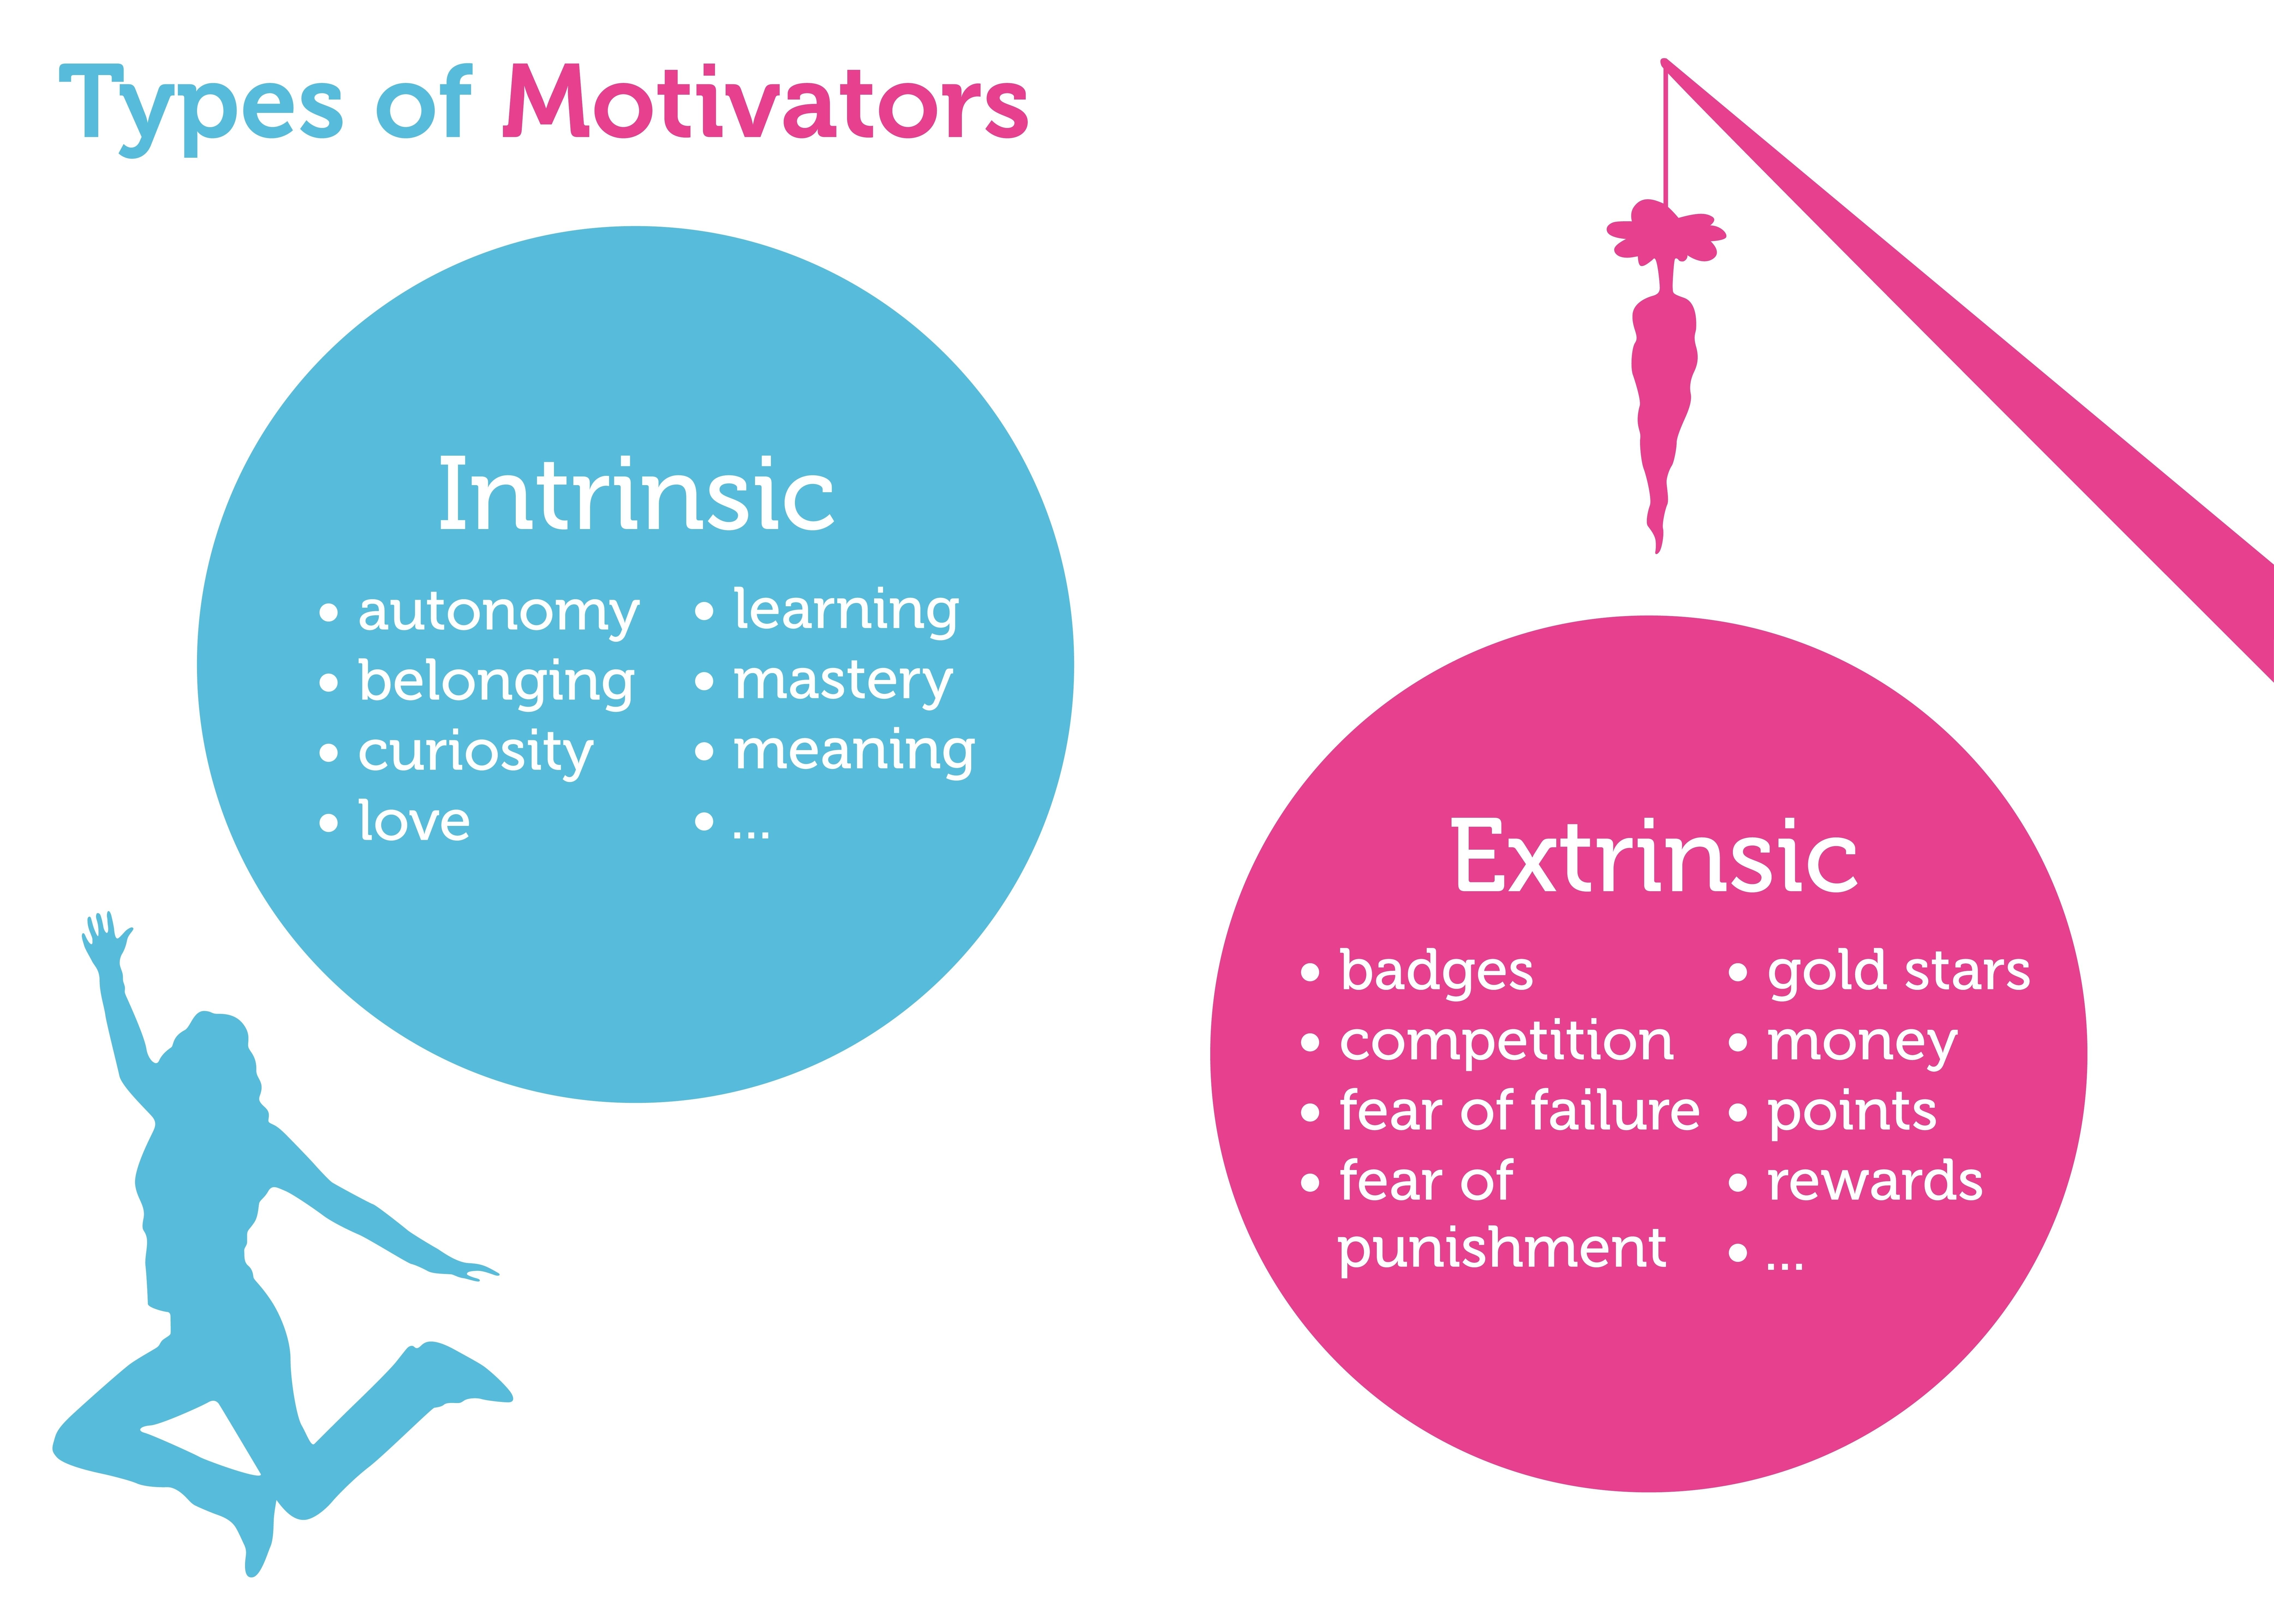 Kinds of messages. Types of Motivation. Intrinsic Motivation and extrinsic Motivation. Intrinsic extrinsic. Types of extrinsic Motivation.